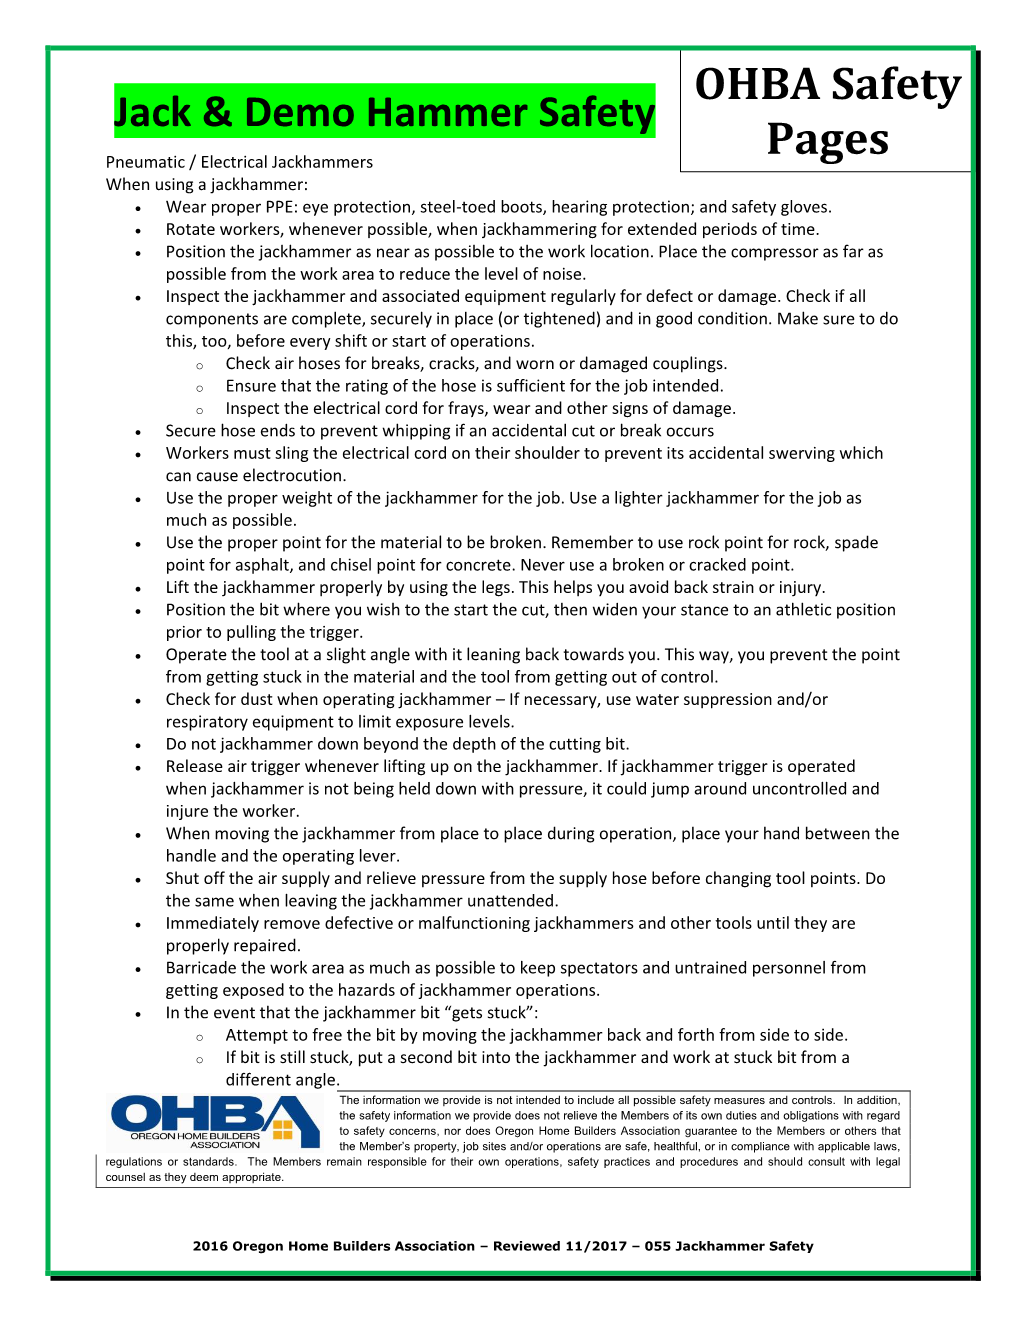 OHBA Safety Pages